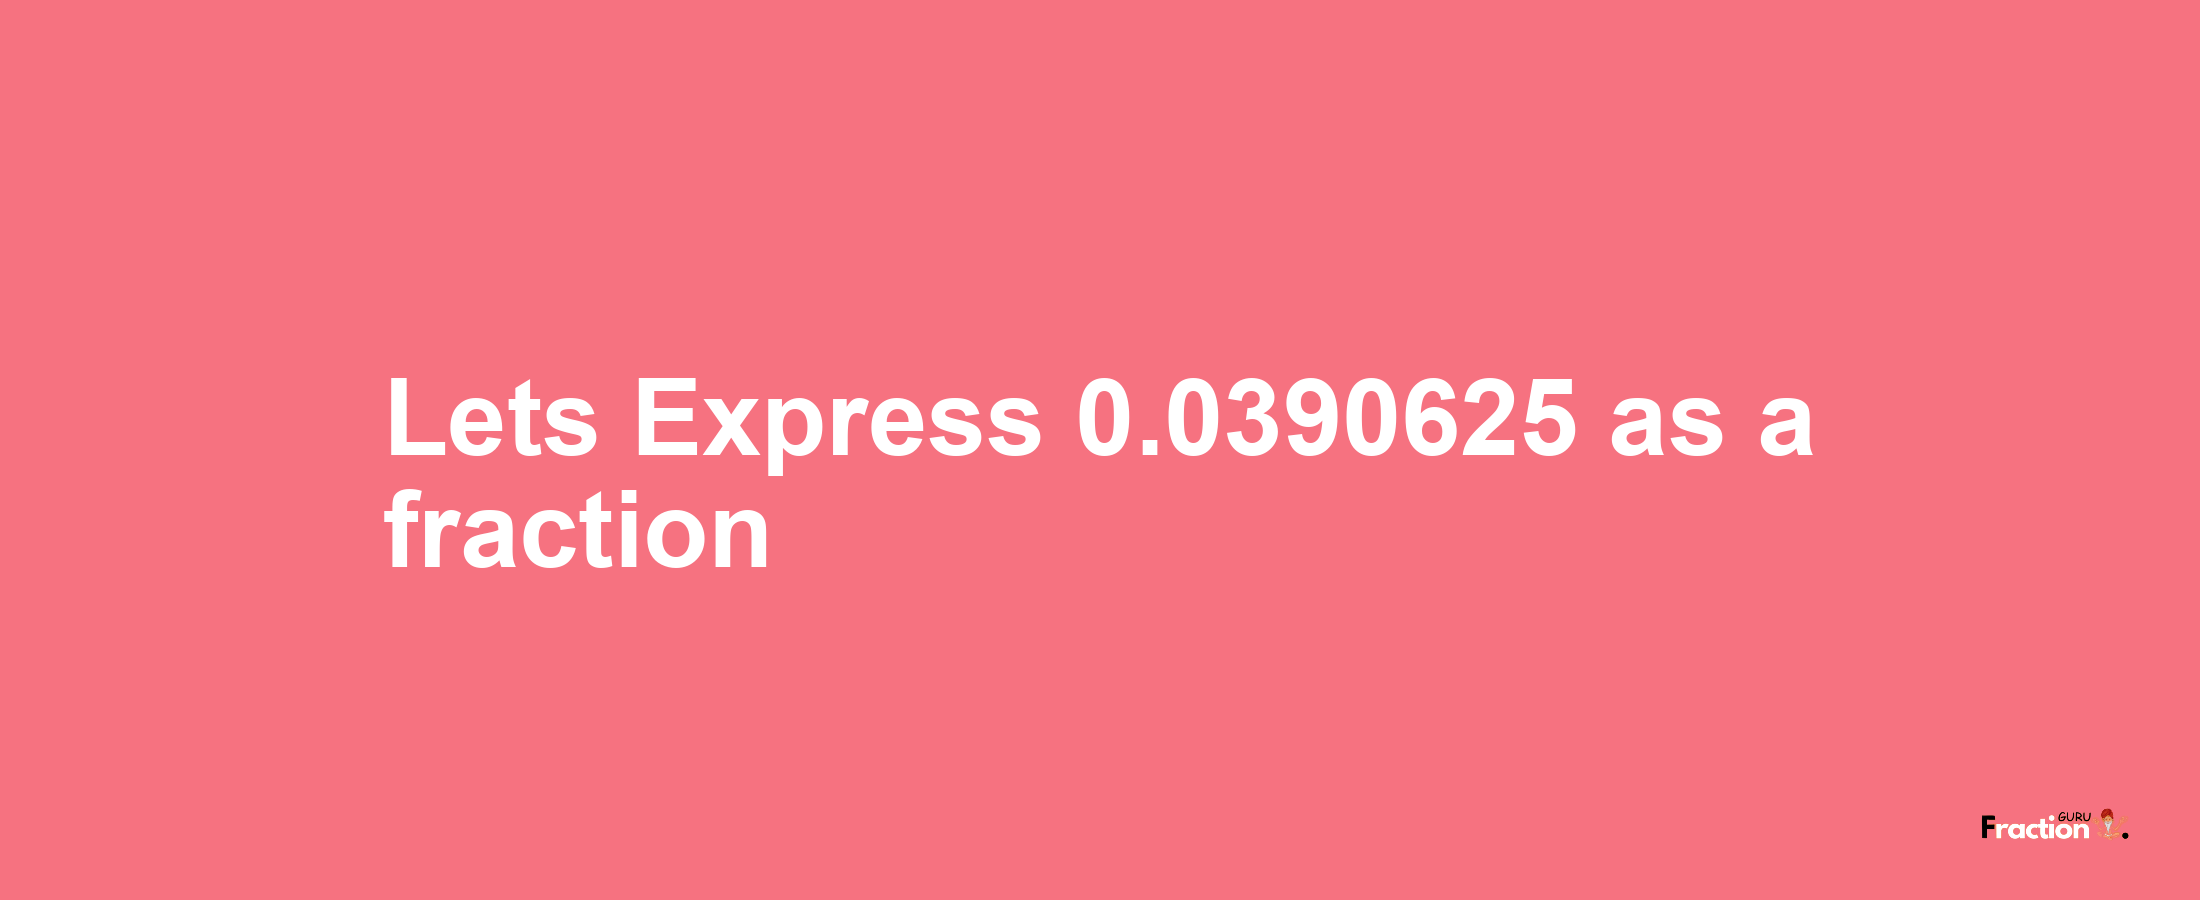 Lets Express 0.0390625 as afraction